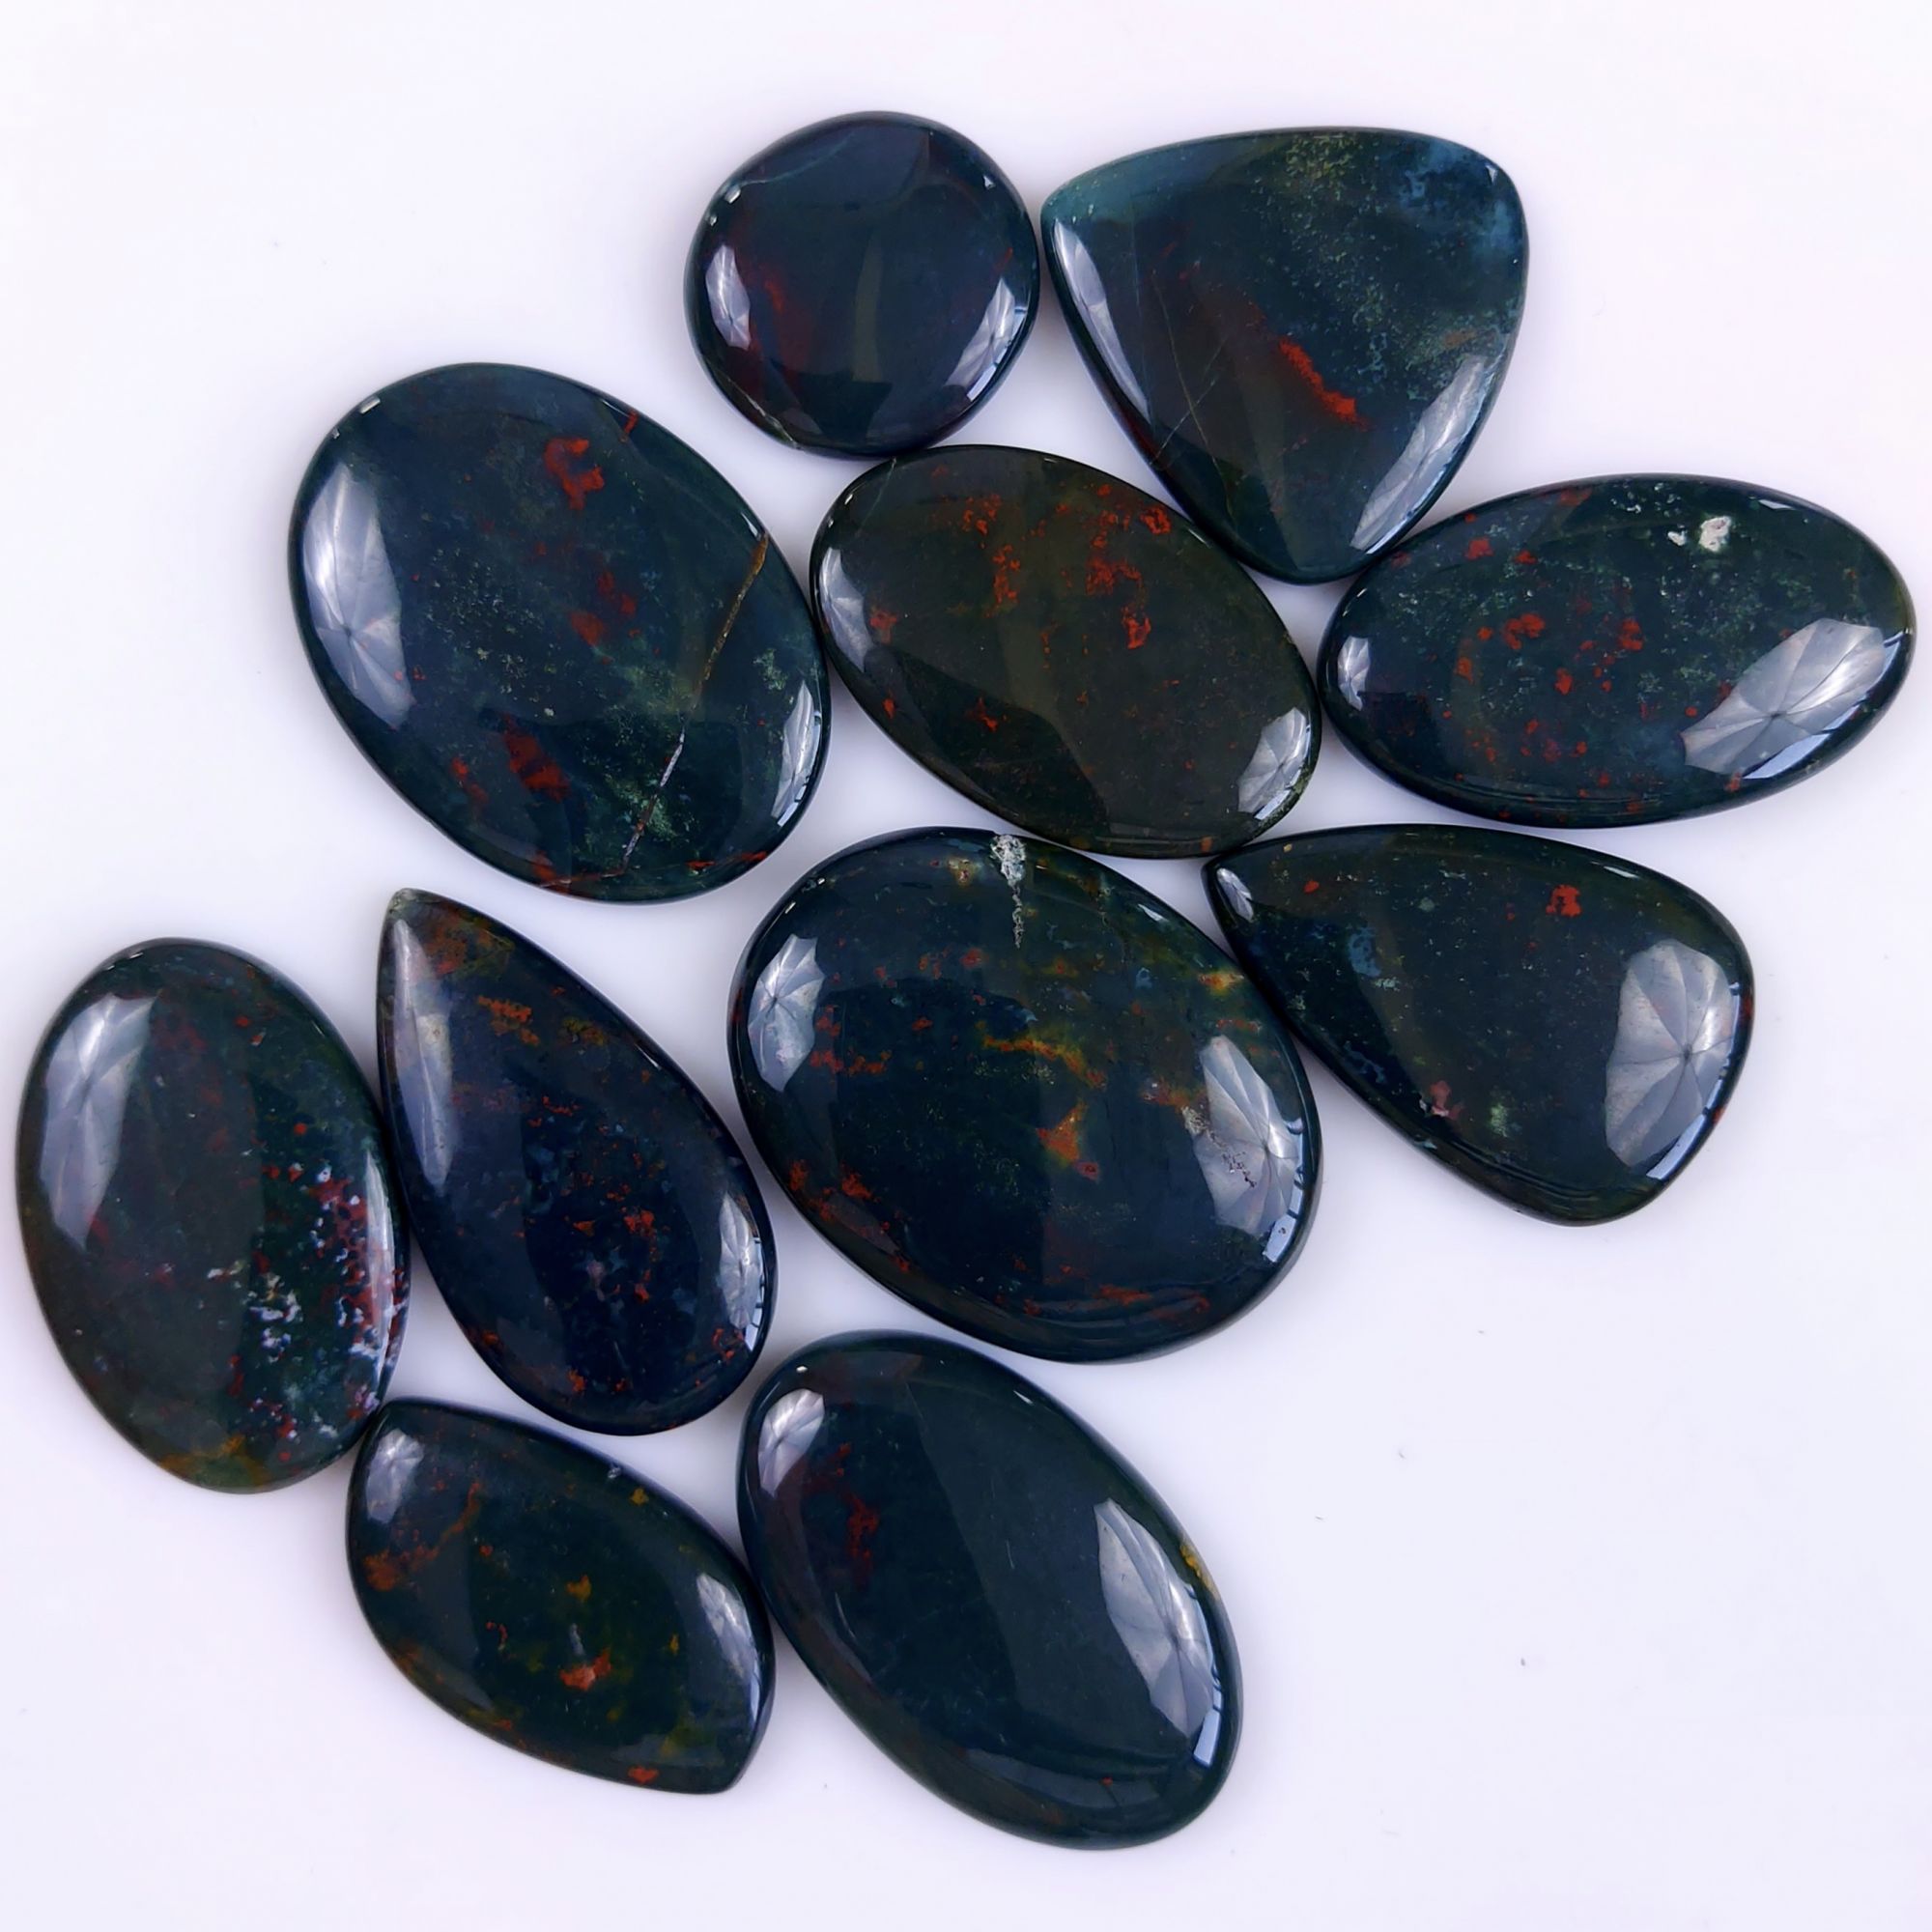 11Pcs 472Cts  Natural Green Blood Stone Loose Cabochon Gemstone Lot For Jewelry Making Gift For Her 40x30 23x23 mm#901